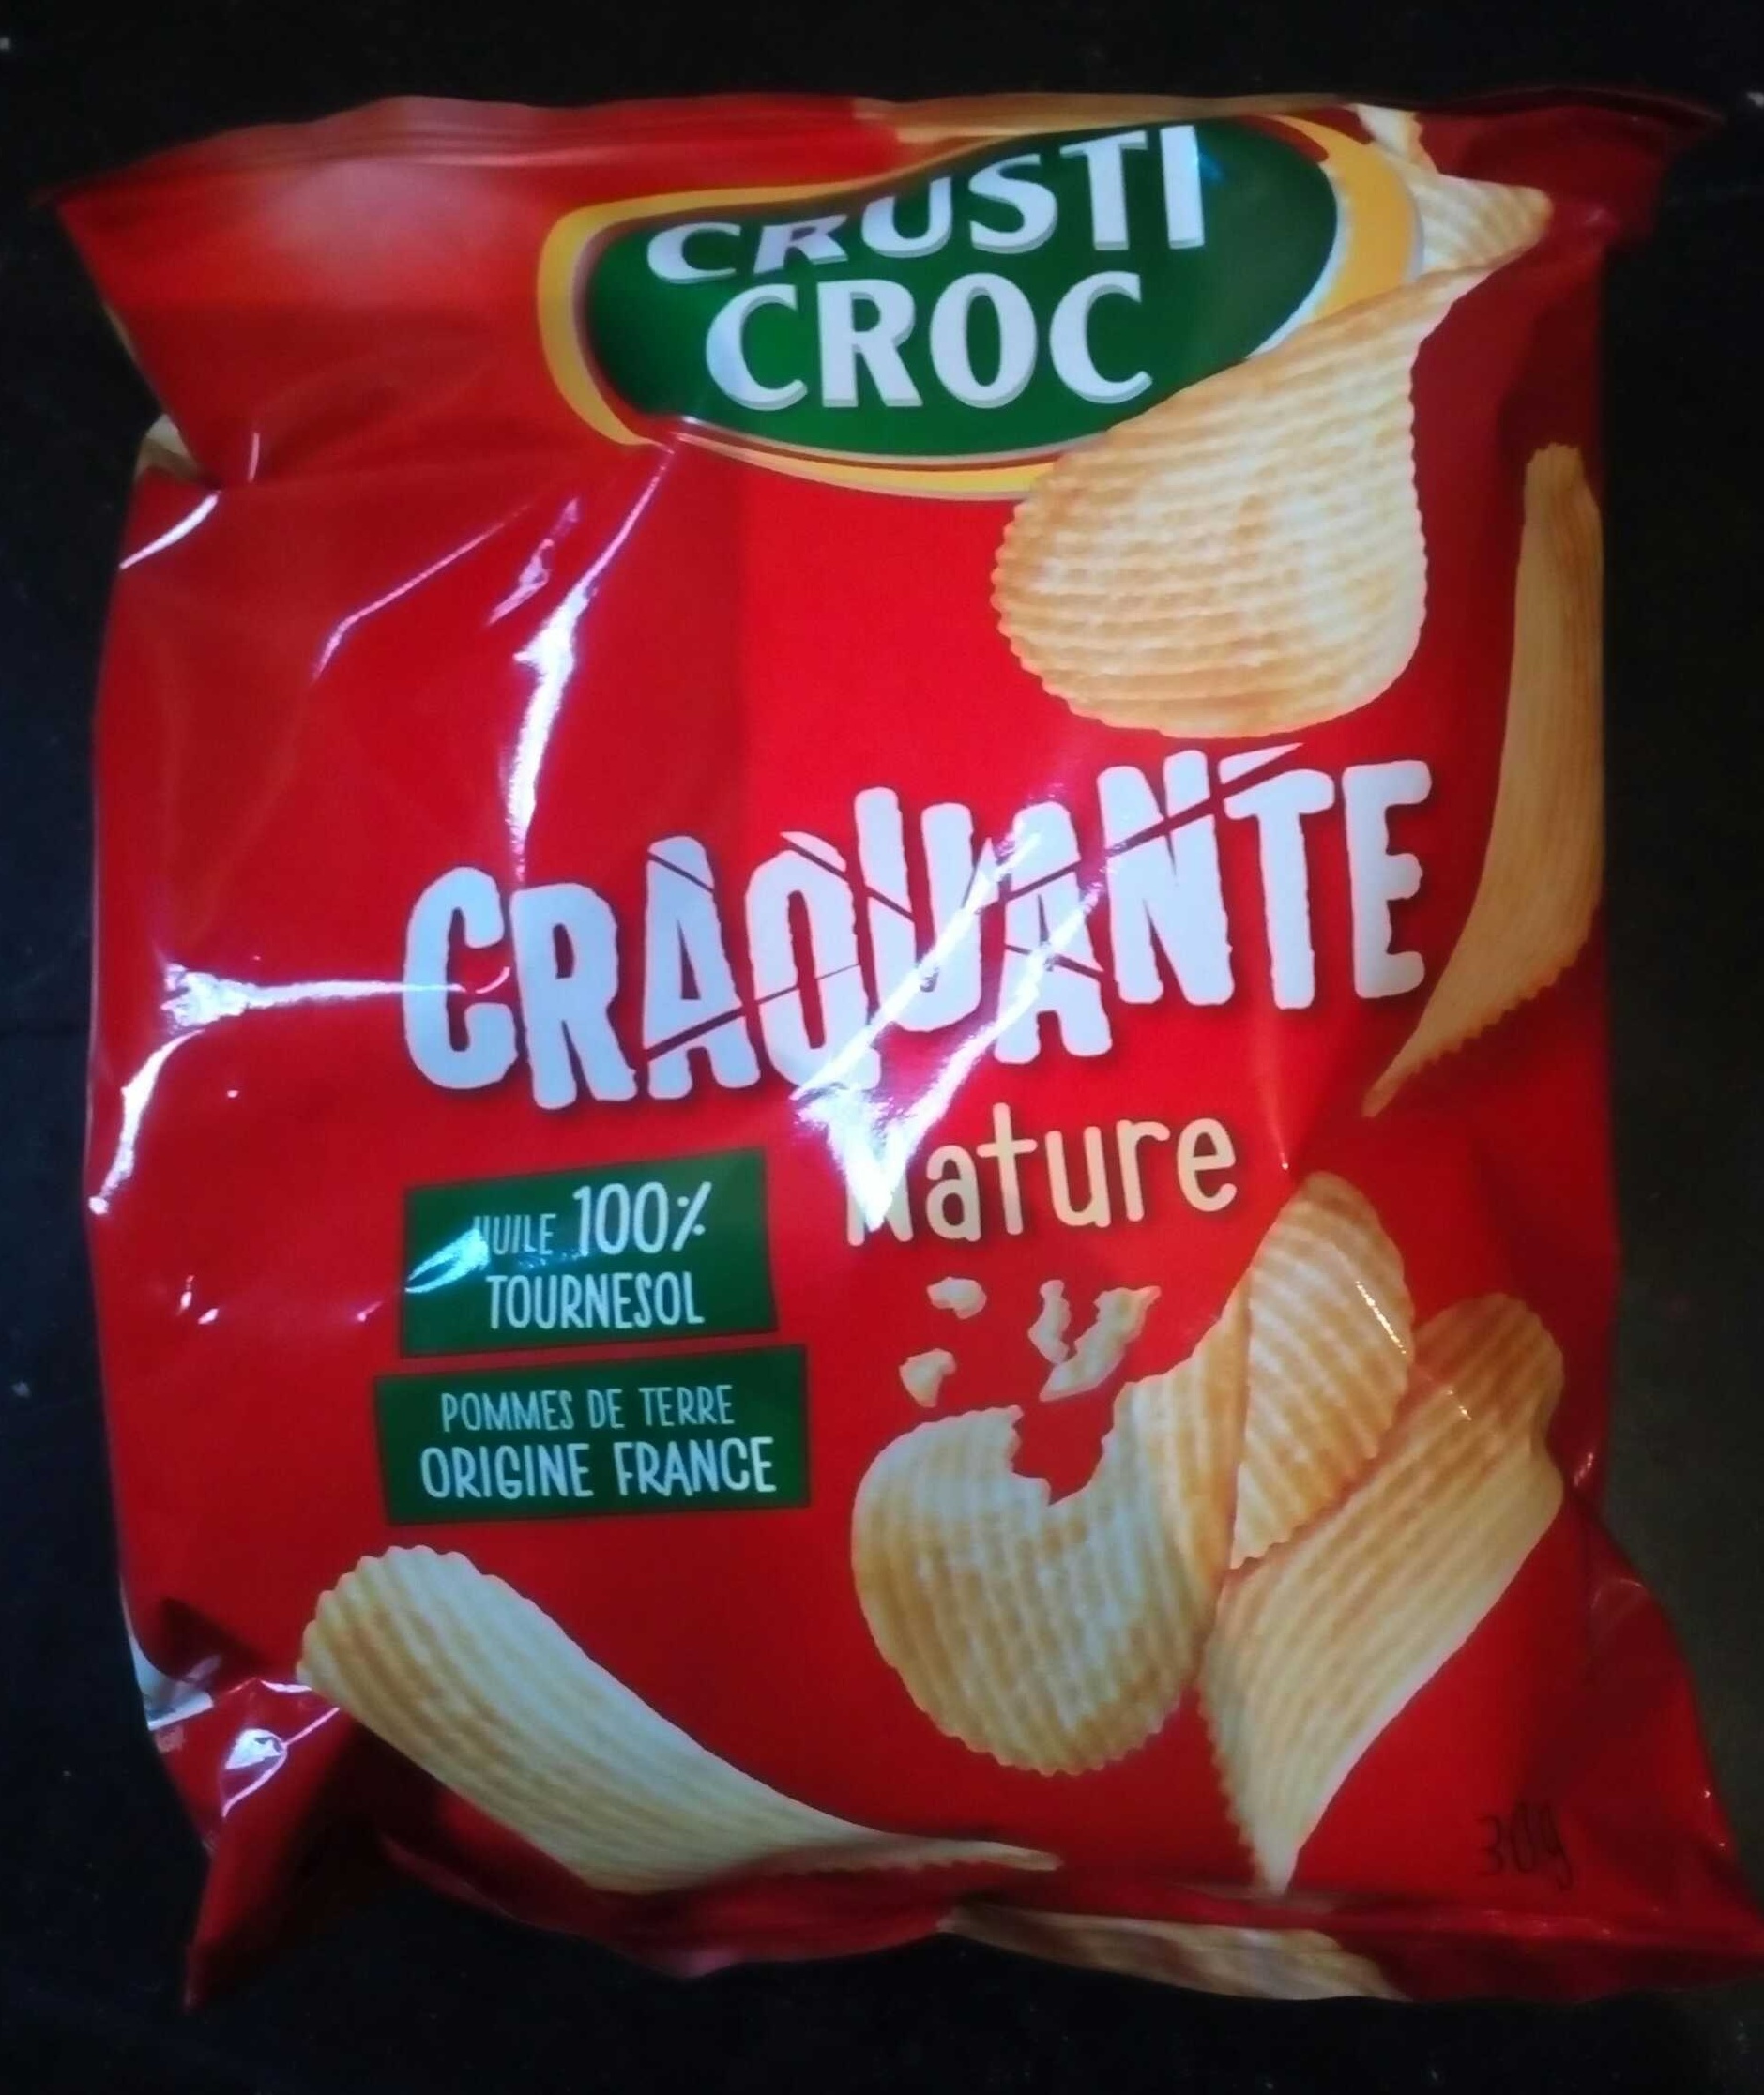 Chips craquante nature - Product - fr